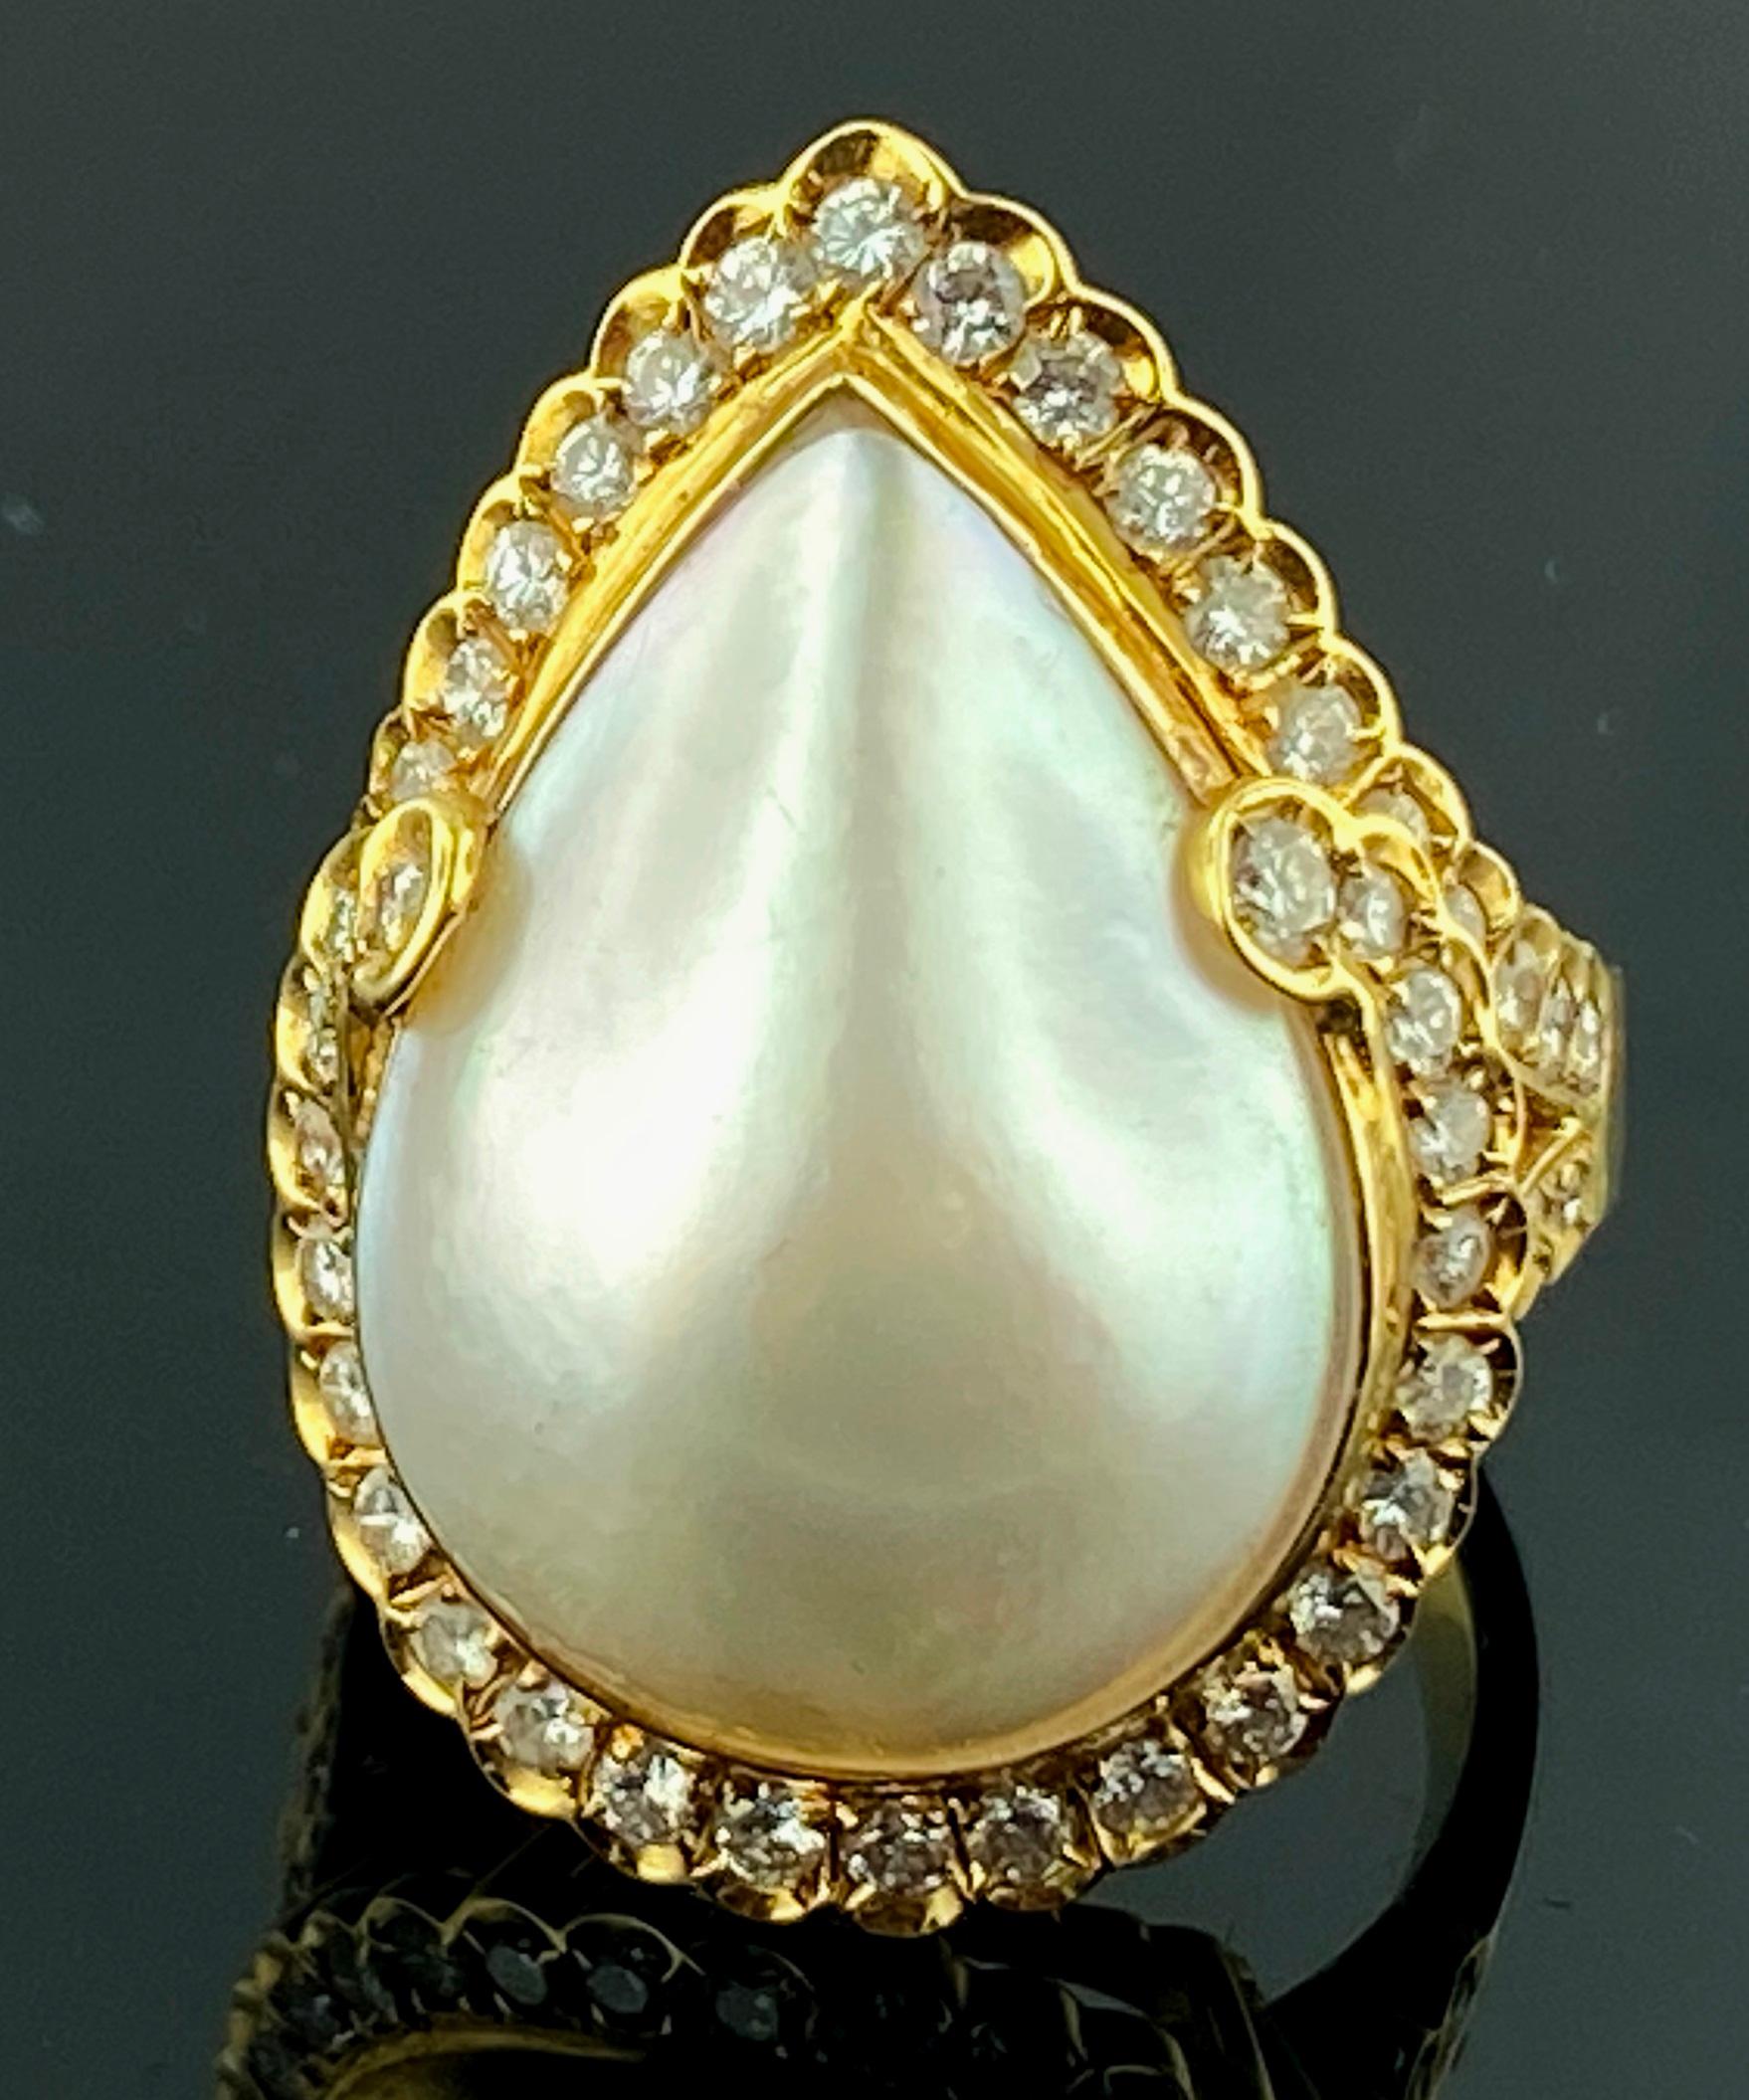 Set in 18 karat yellow gold is a pear shaped Mabe Pearl with 50 round brilliant diamonds with a total diamond weight of 0.75 carats.  Ring size is 6.25.  Gold weight is 9 grams.